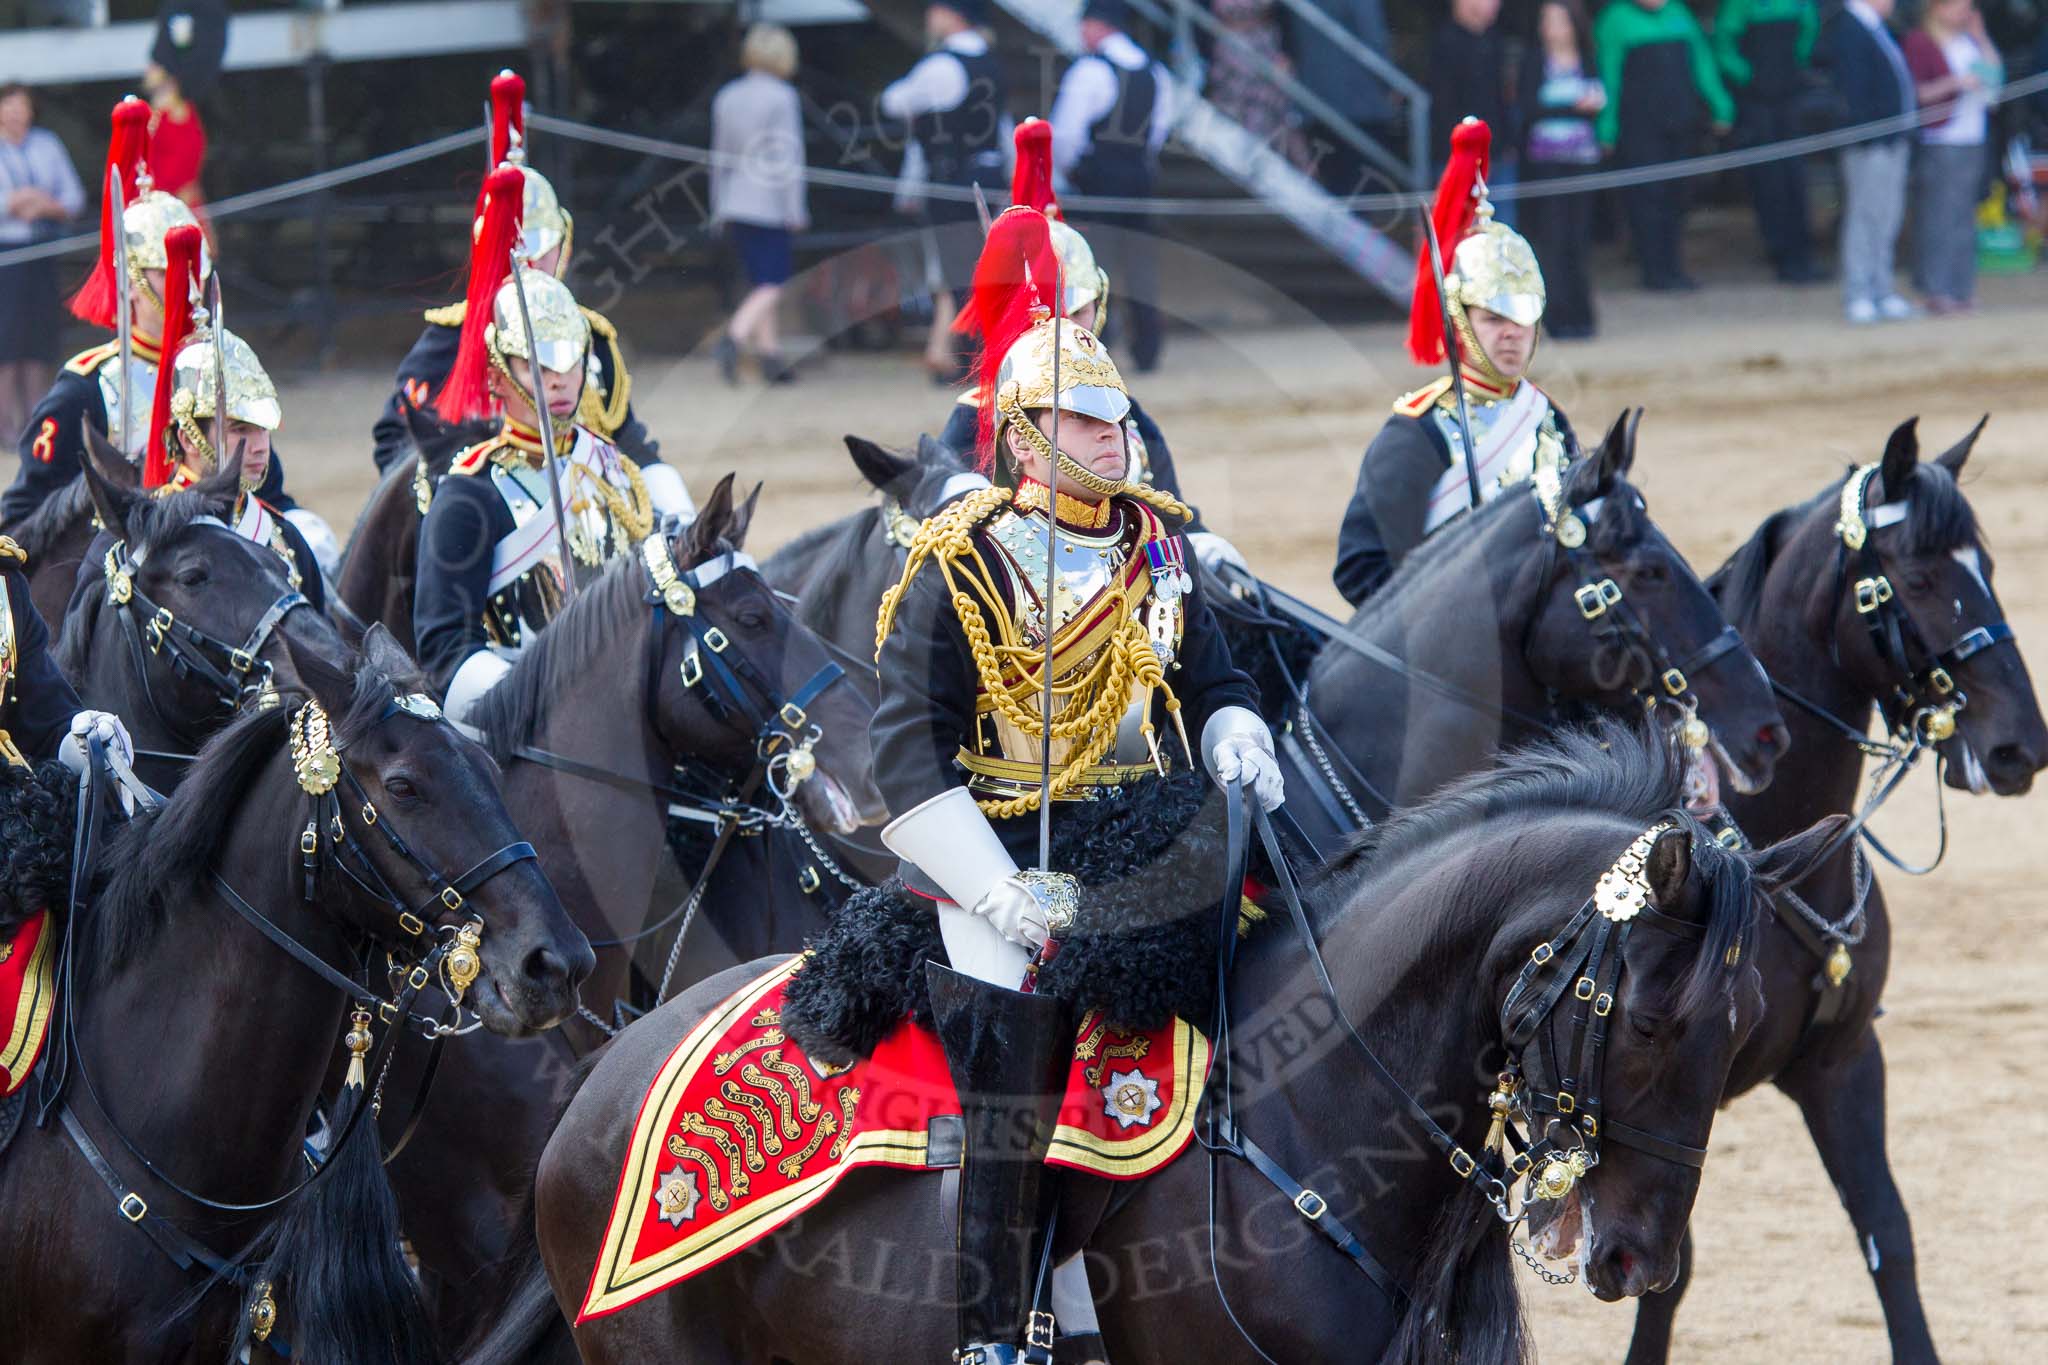 The Colonel's Review 2013: The Third and Forth Divisions of the Sovereign's Escort, The Blues and Royals, during the Ride Past..
Horse Guards Parade, Westminster,
London SW1,

United Kingdom,
on 08 June 2013 at 11:57, image #779